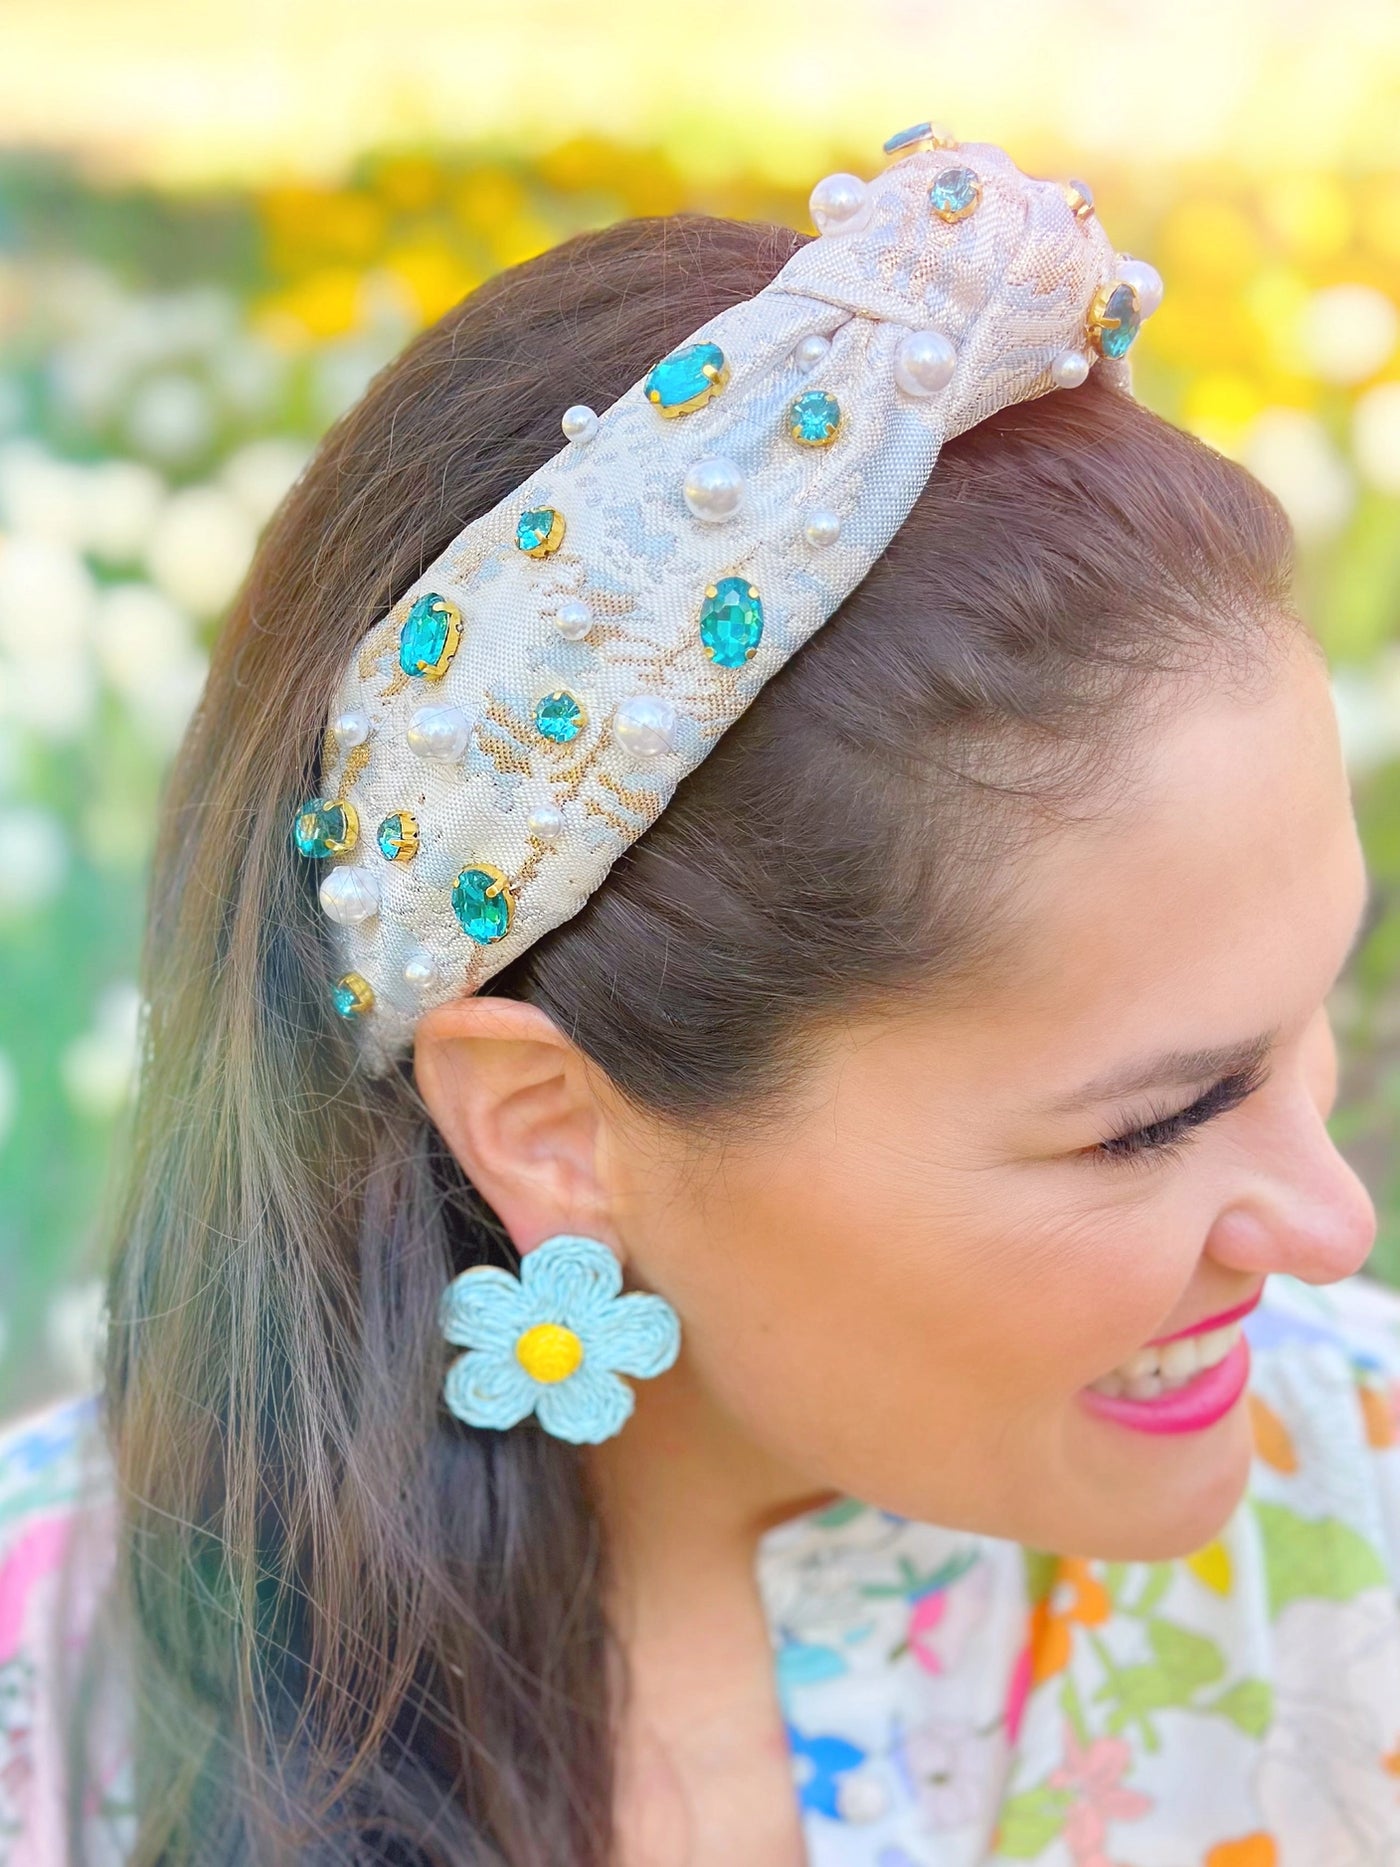 Blue Jacquard Metallic Headband with Crystals and Pearls